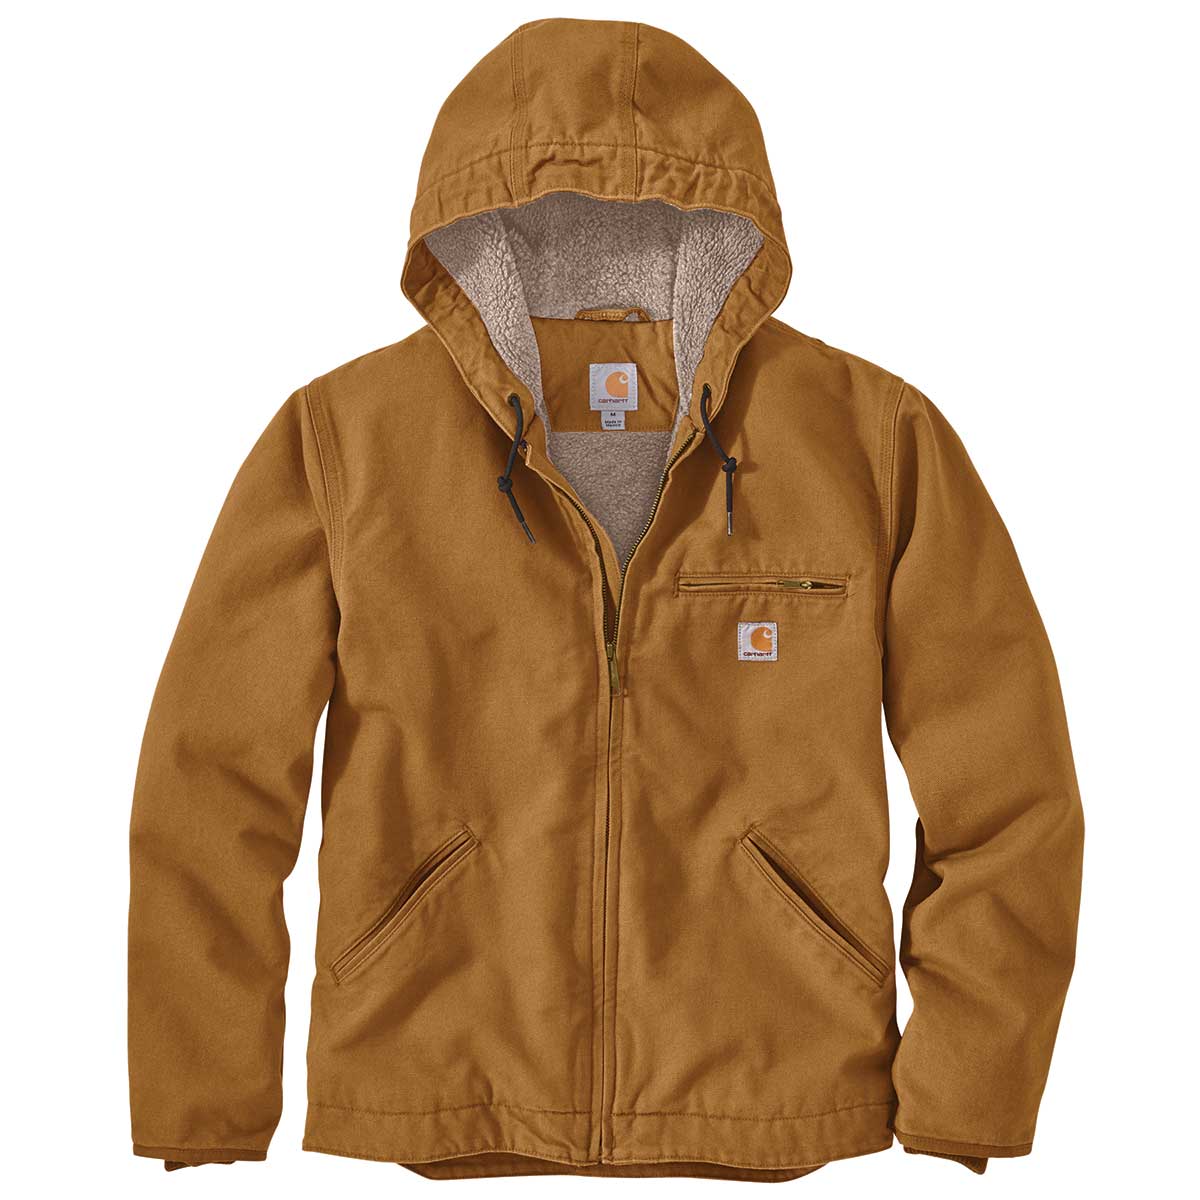 Carhartt Women's Loose Fit Washed Duck Insulated Active Jac J130